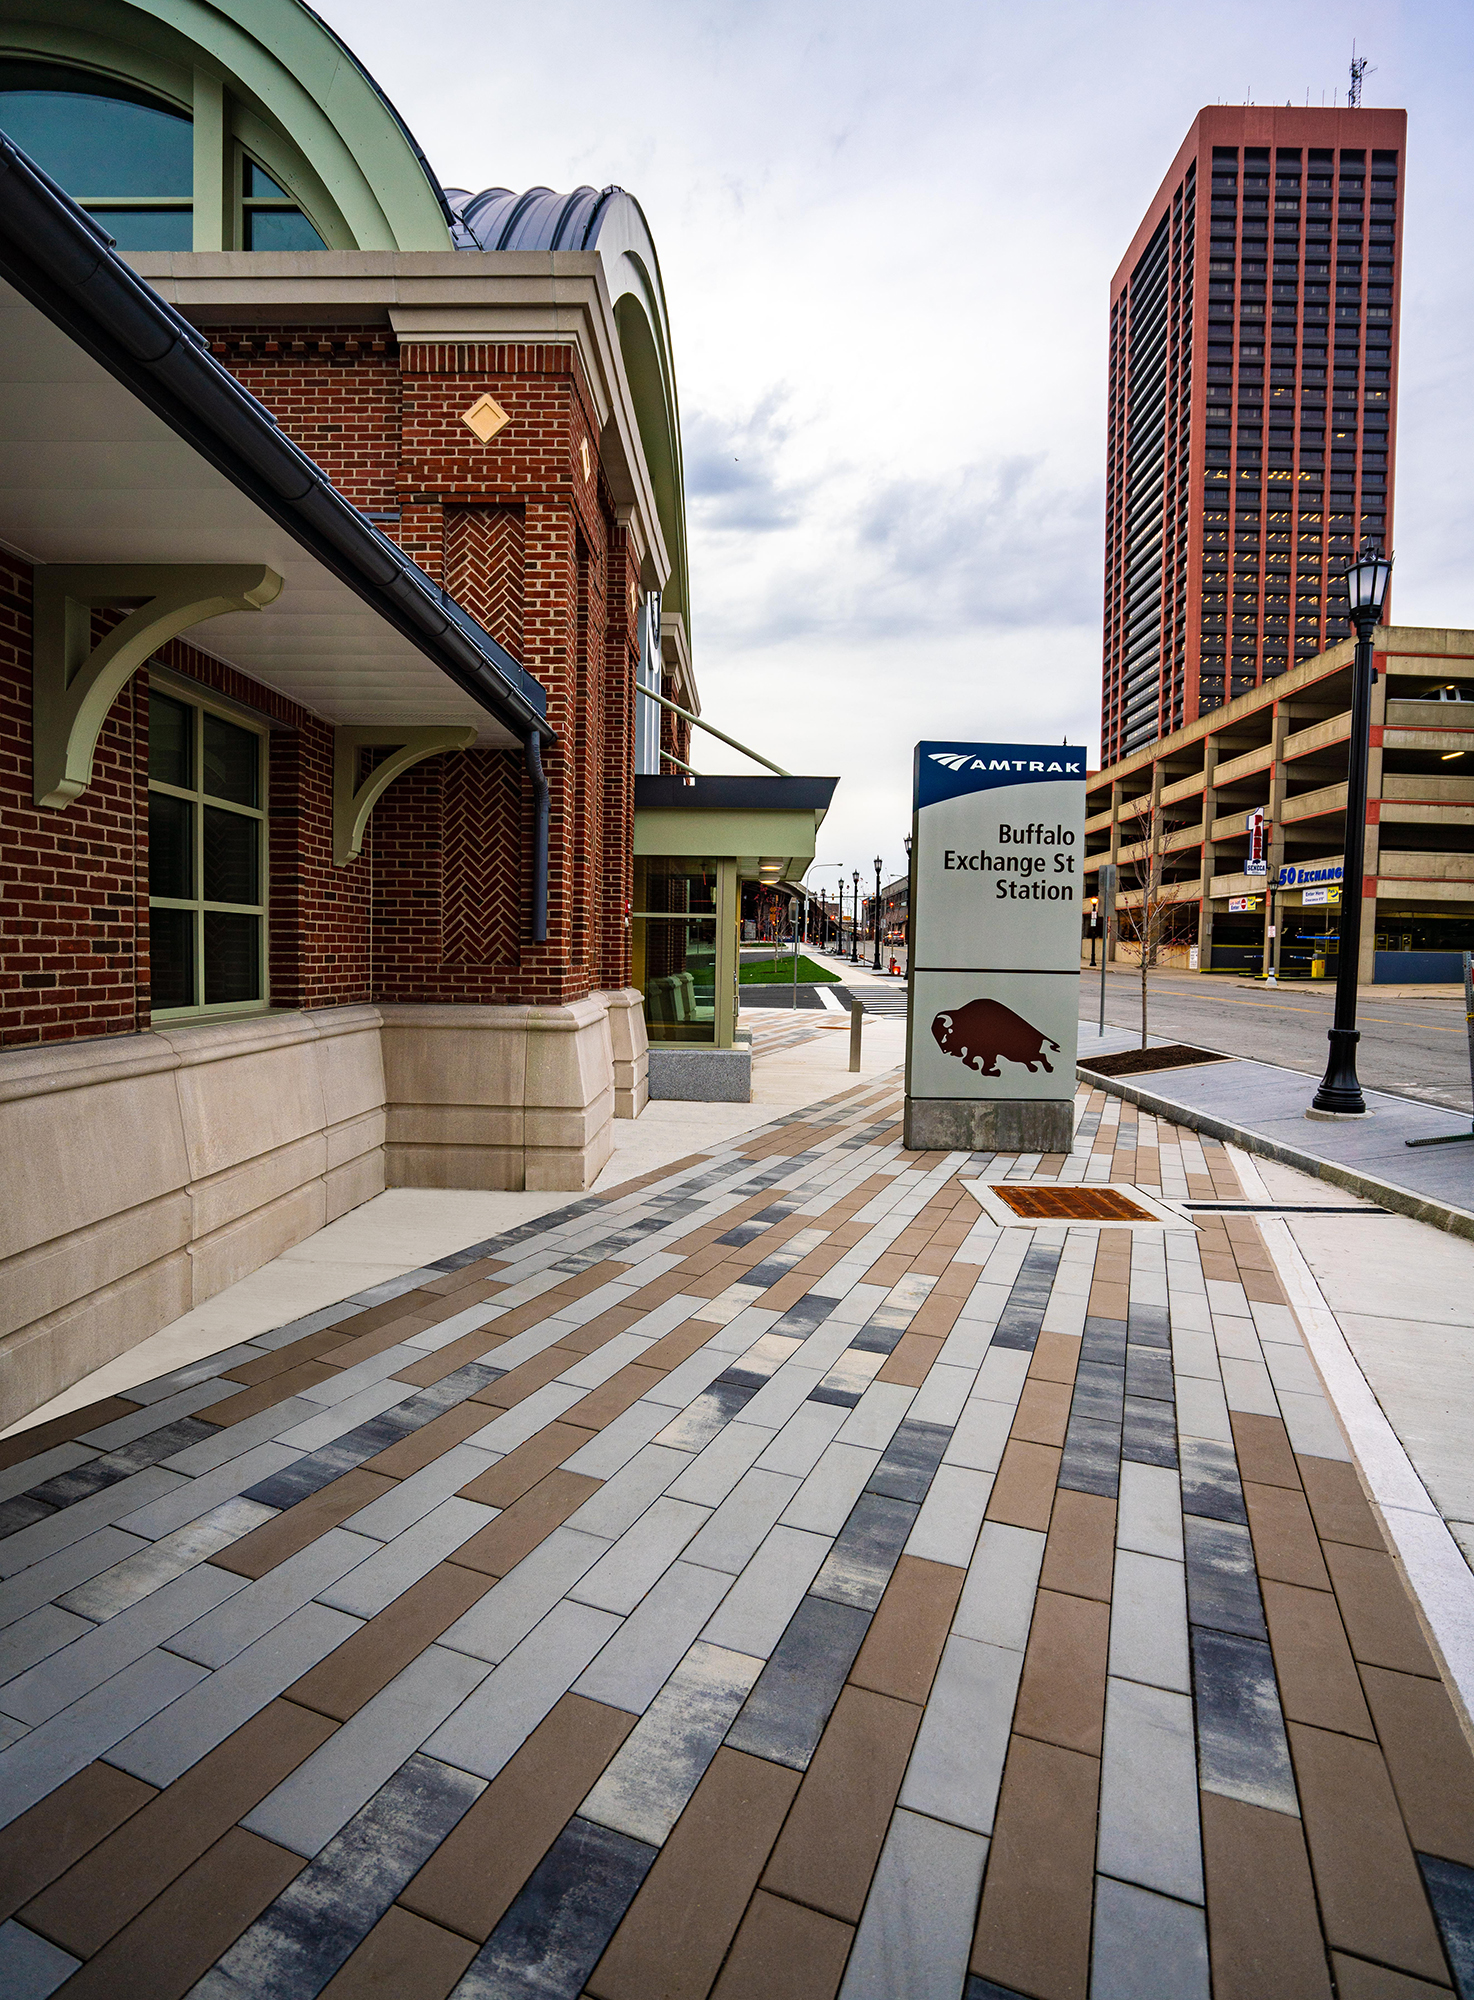 Buffalo Exchange Street Station is a historic building with the entry paved with three colors of Promenade Plank pavers in a linear pattern.